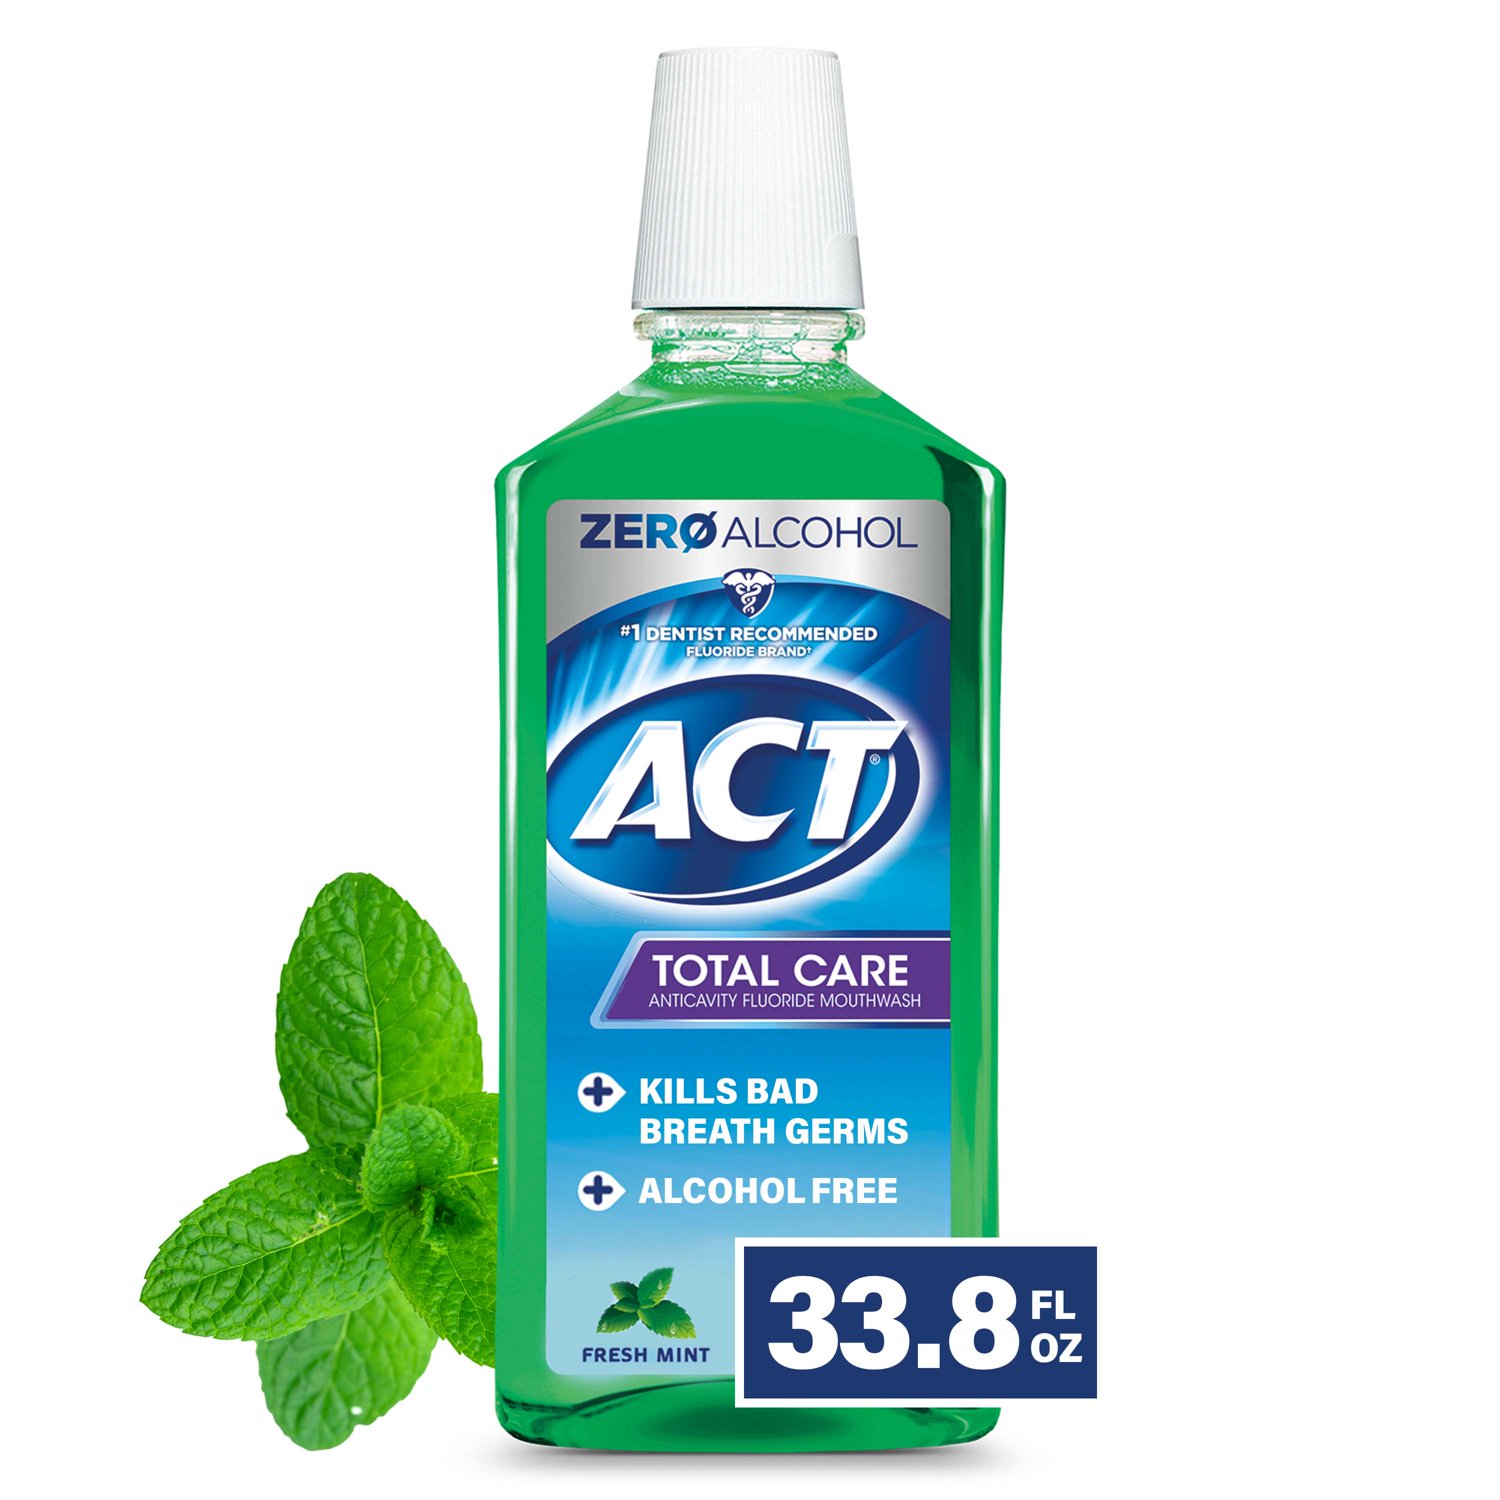 ACT Total Care Anticavity Fluoride Mouthwash, Alcohol Free Mouth Rinse for Adults, Fresh Mint, 33.8 fl oz - image 2 of 11